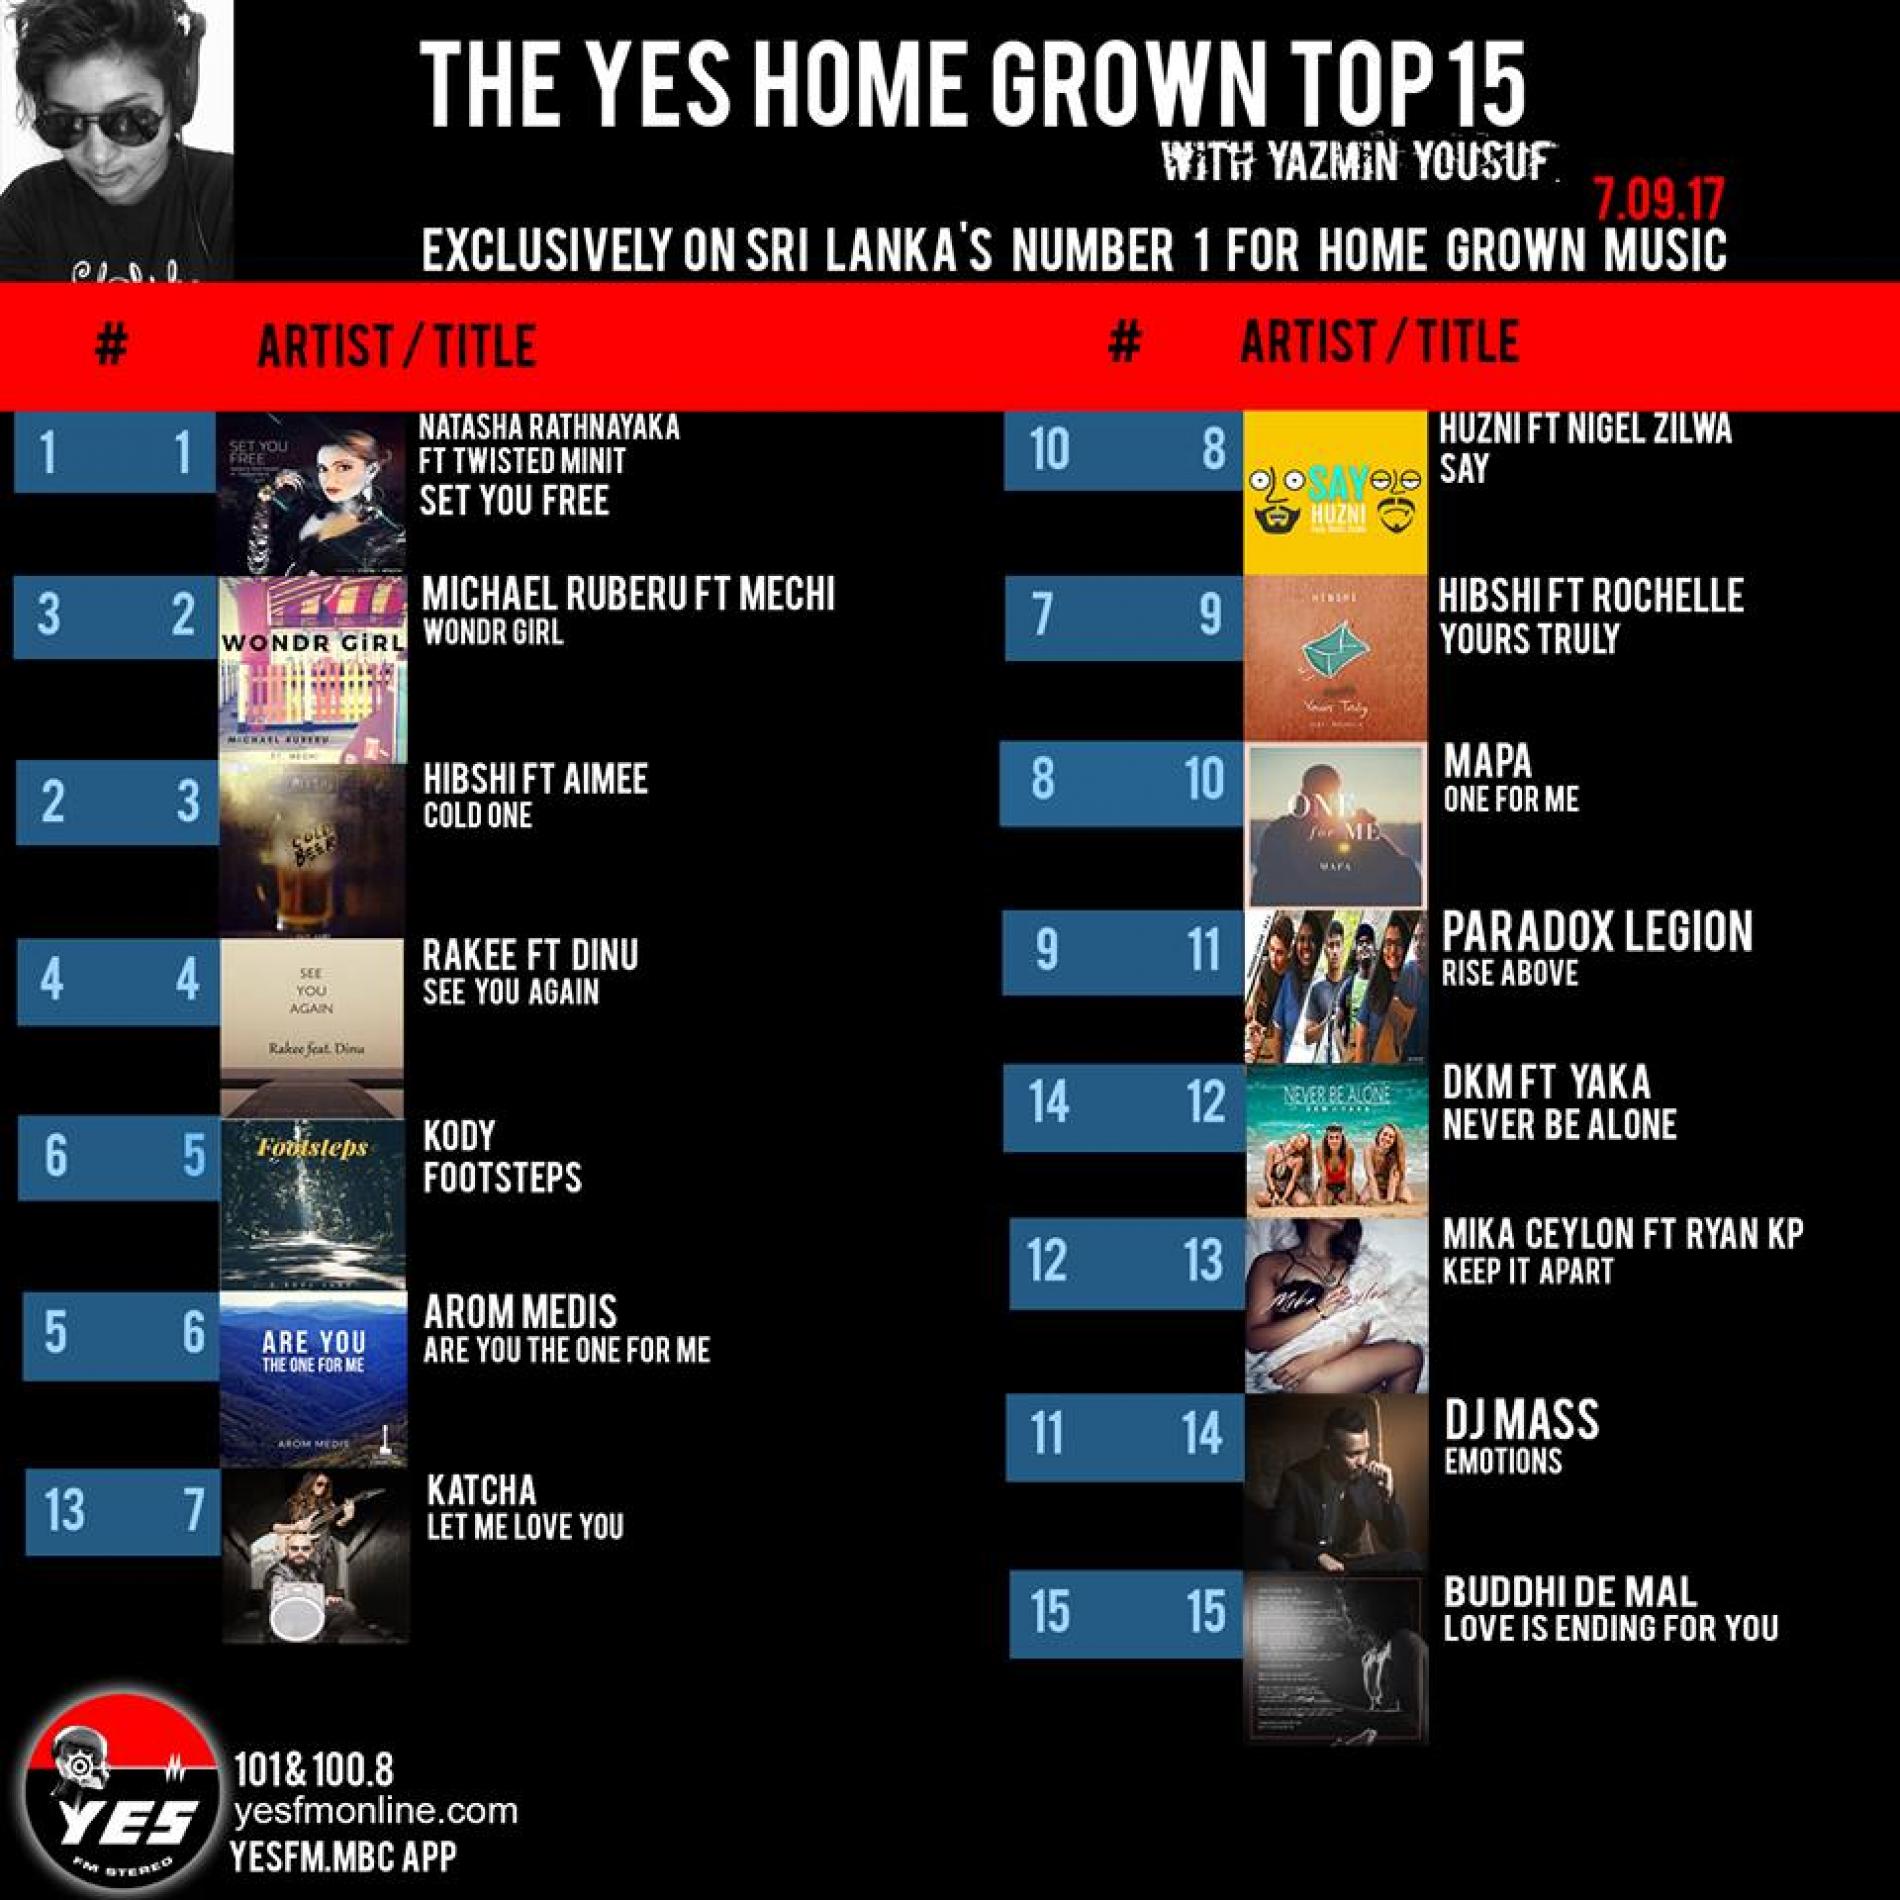 ‘Set You Free’ Owns The Top Spot For A 4th Week!